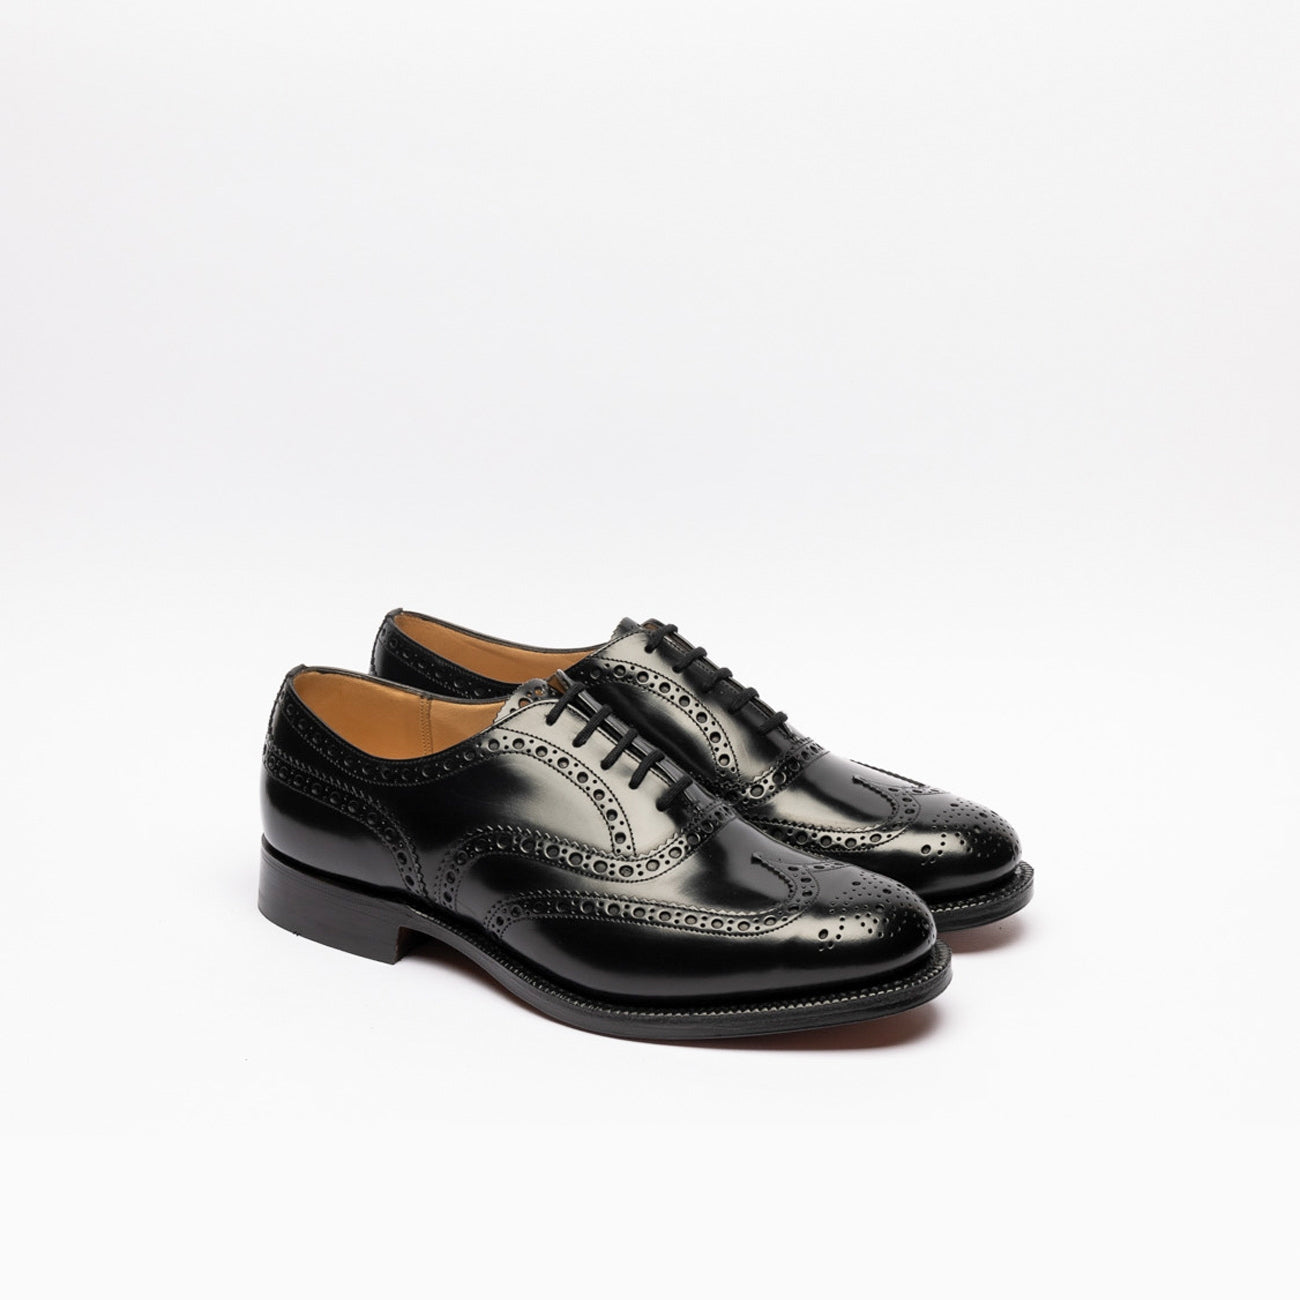 Church's Burwood 81 oxford lace-up in black brushed leather